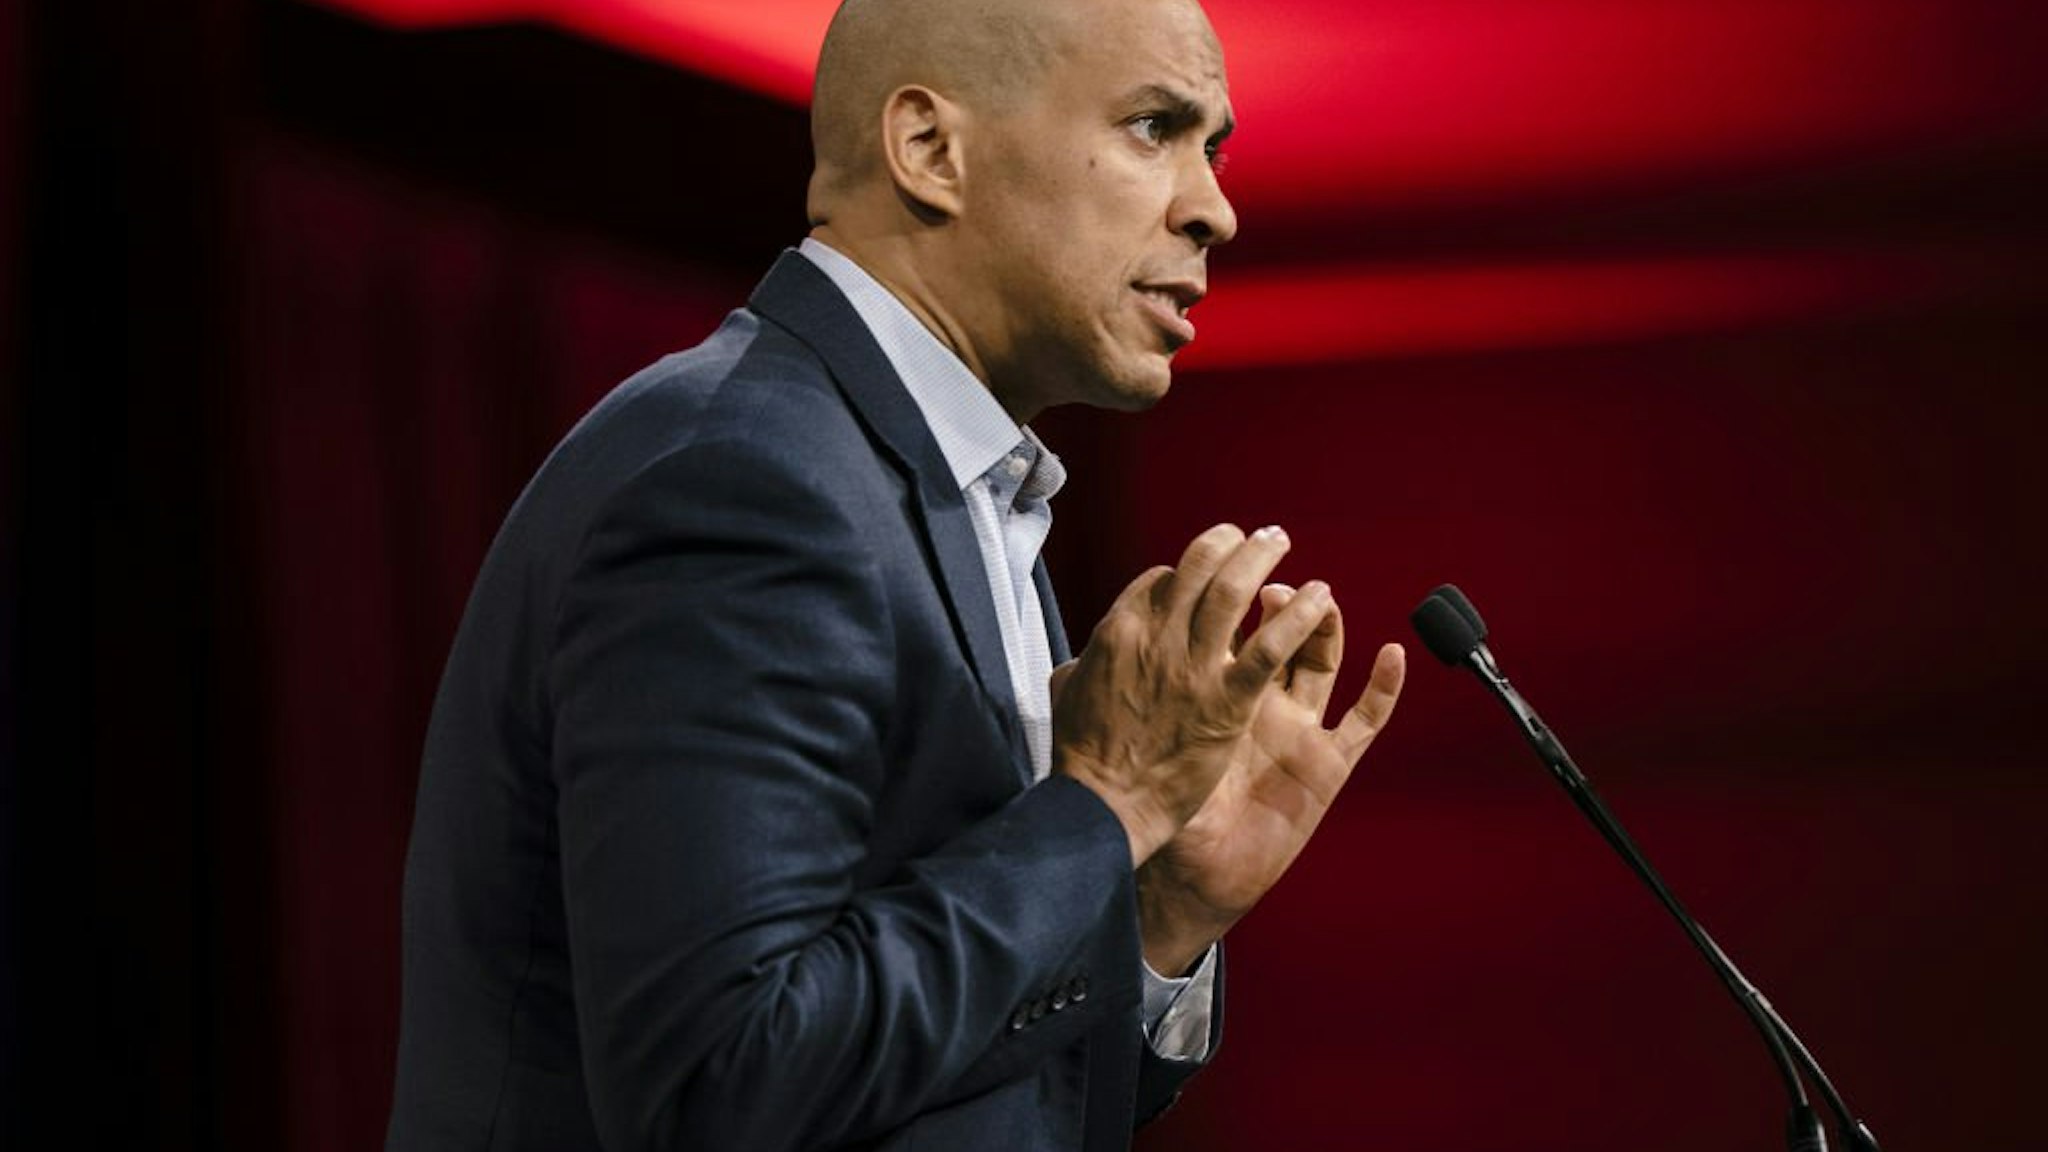 Senator Cory Booker, a Democrat from New Jersey and 2020 presidential candidate, speaks during the Democratic National Committee (DNC) Summer Meeting in San Francisco, California, U.S., on Friday, Aug. 23, 2019.